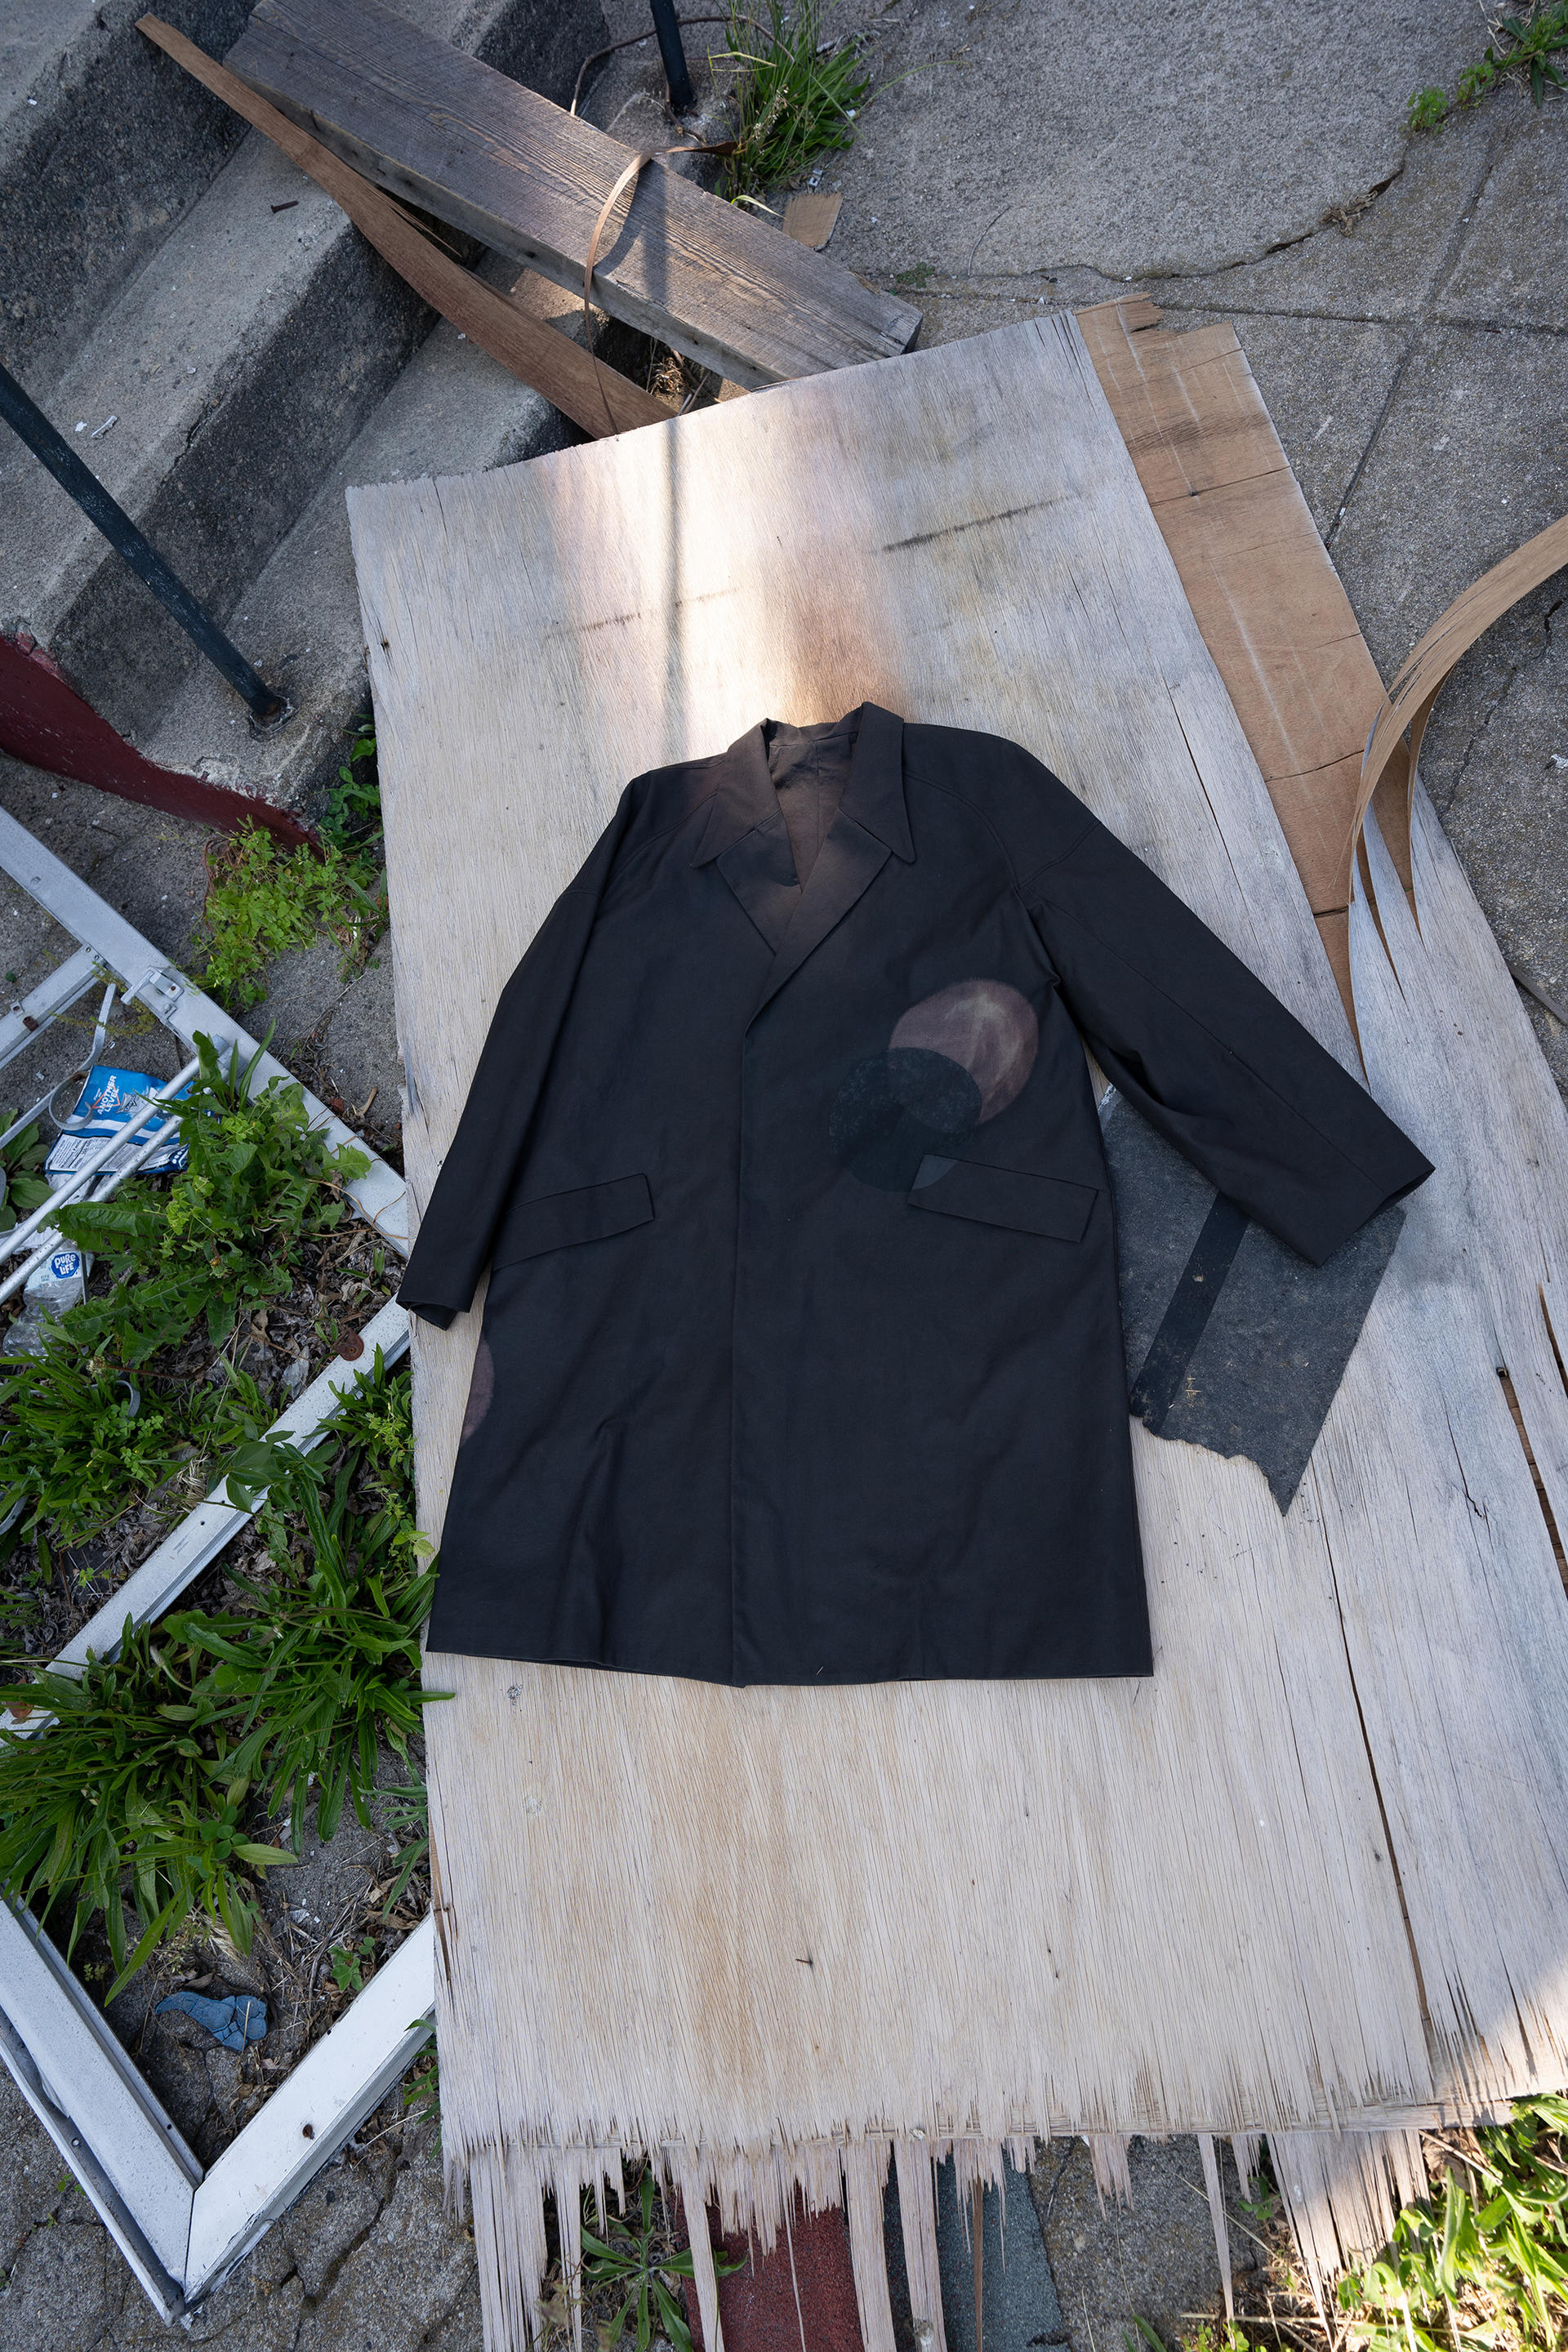 black coat on a piece of discarded wood on the ground